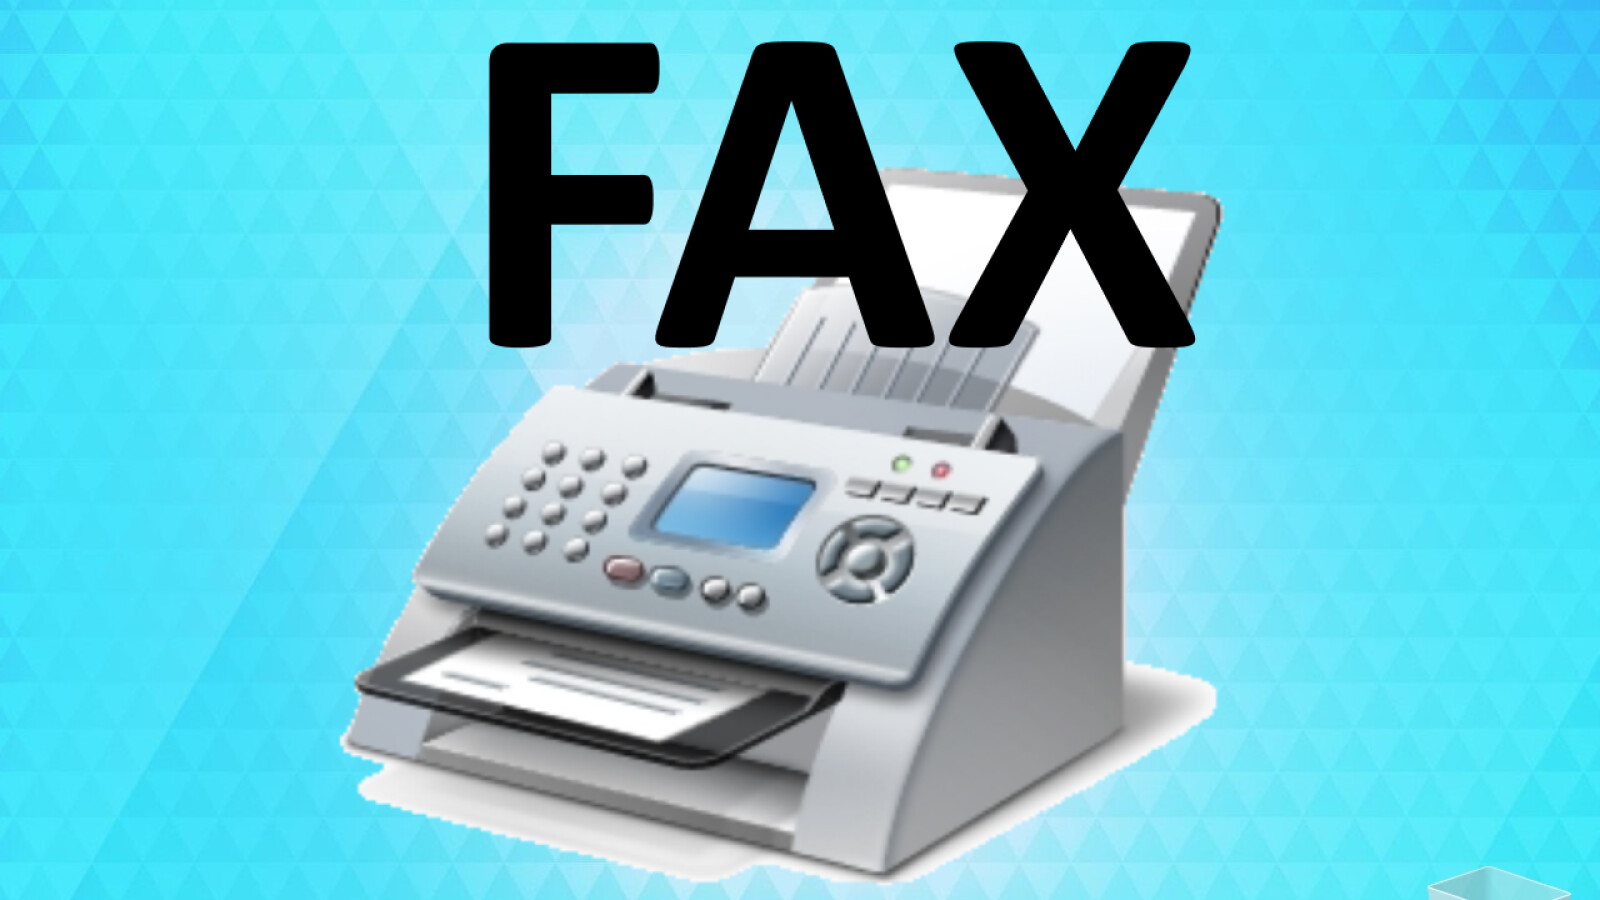 win 10 fax and scan